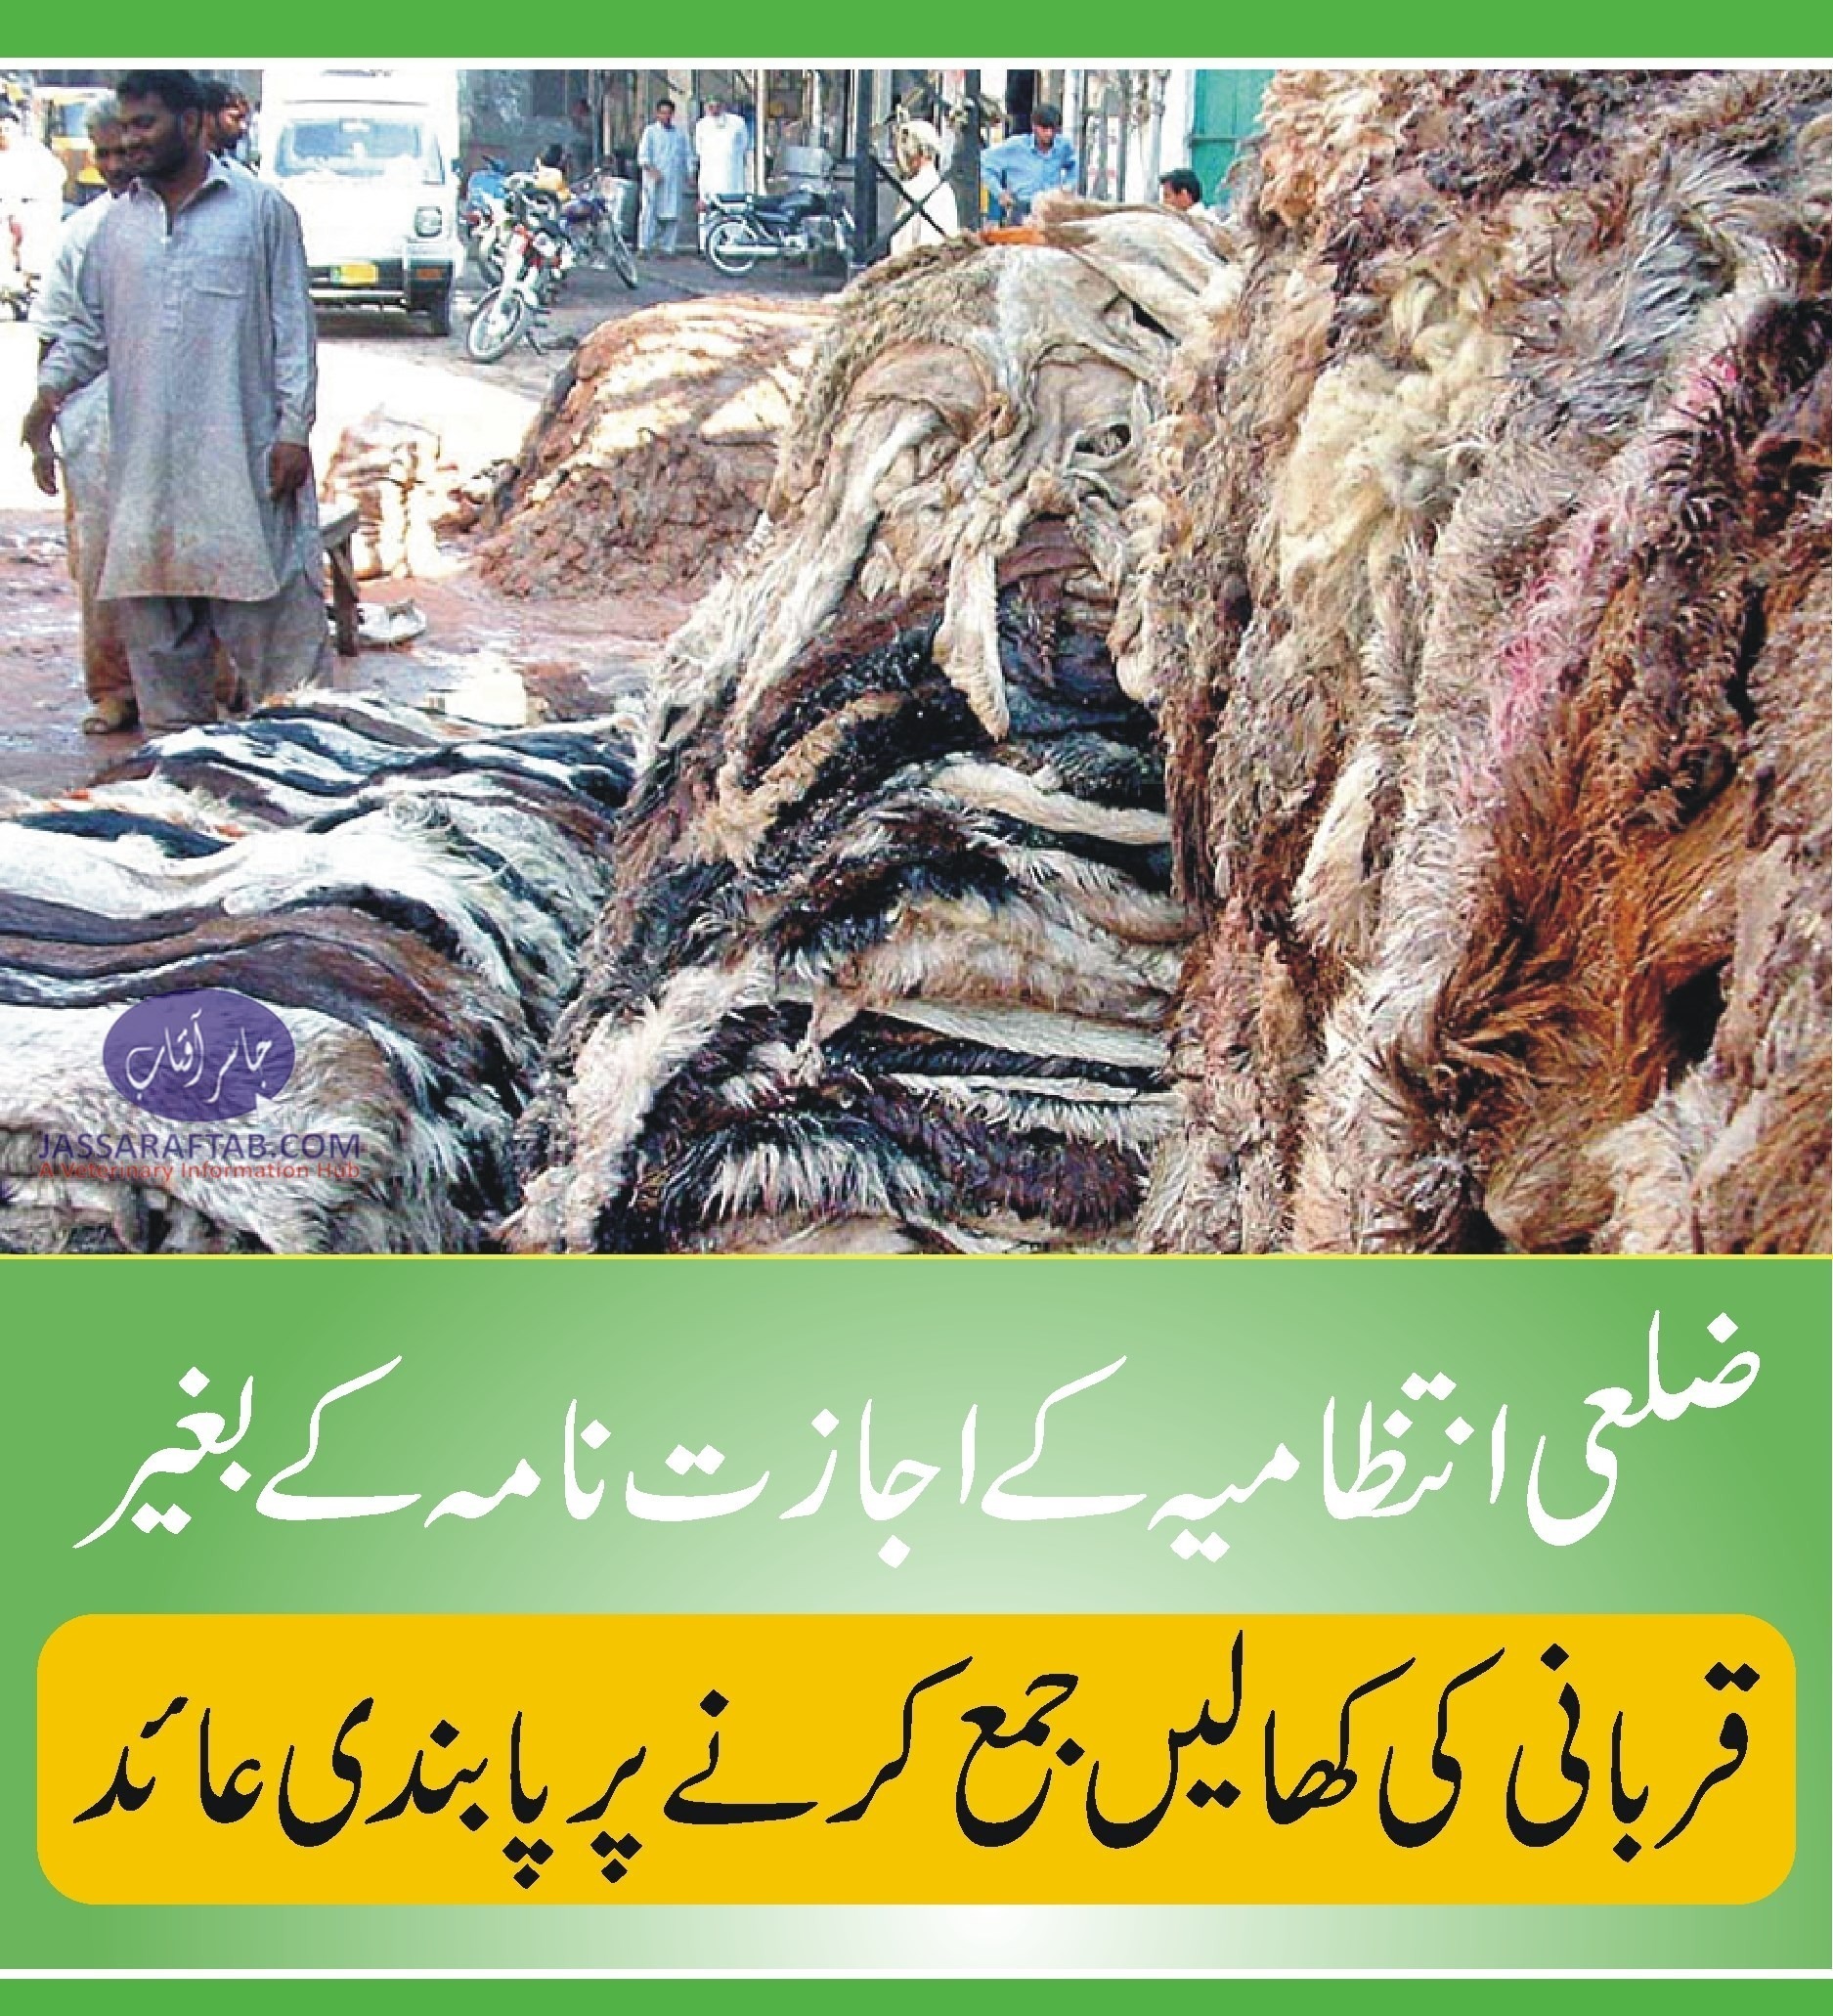 Collection of sacrificial animals banned